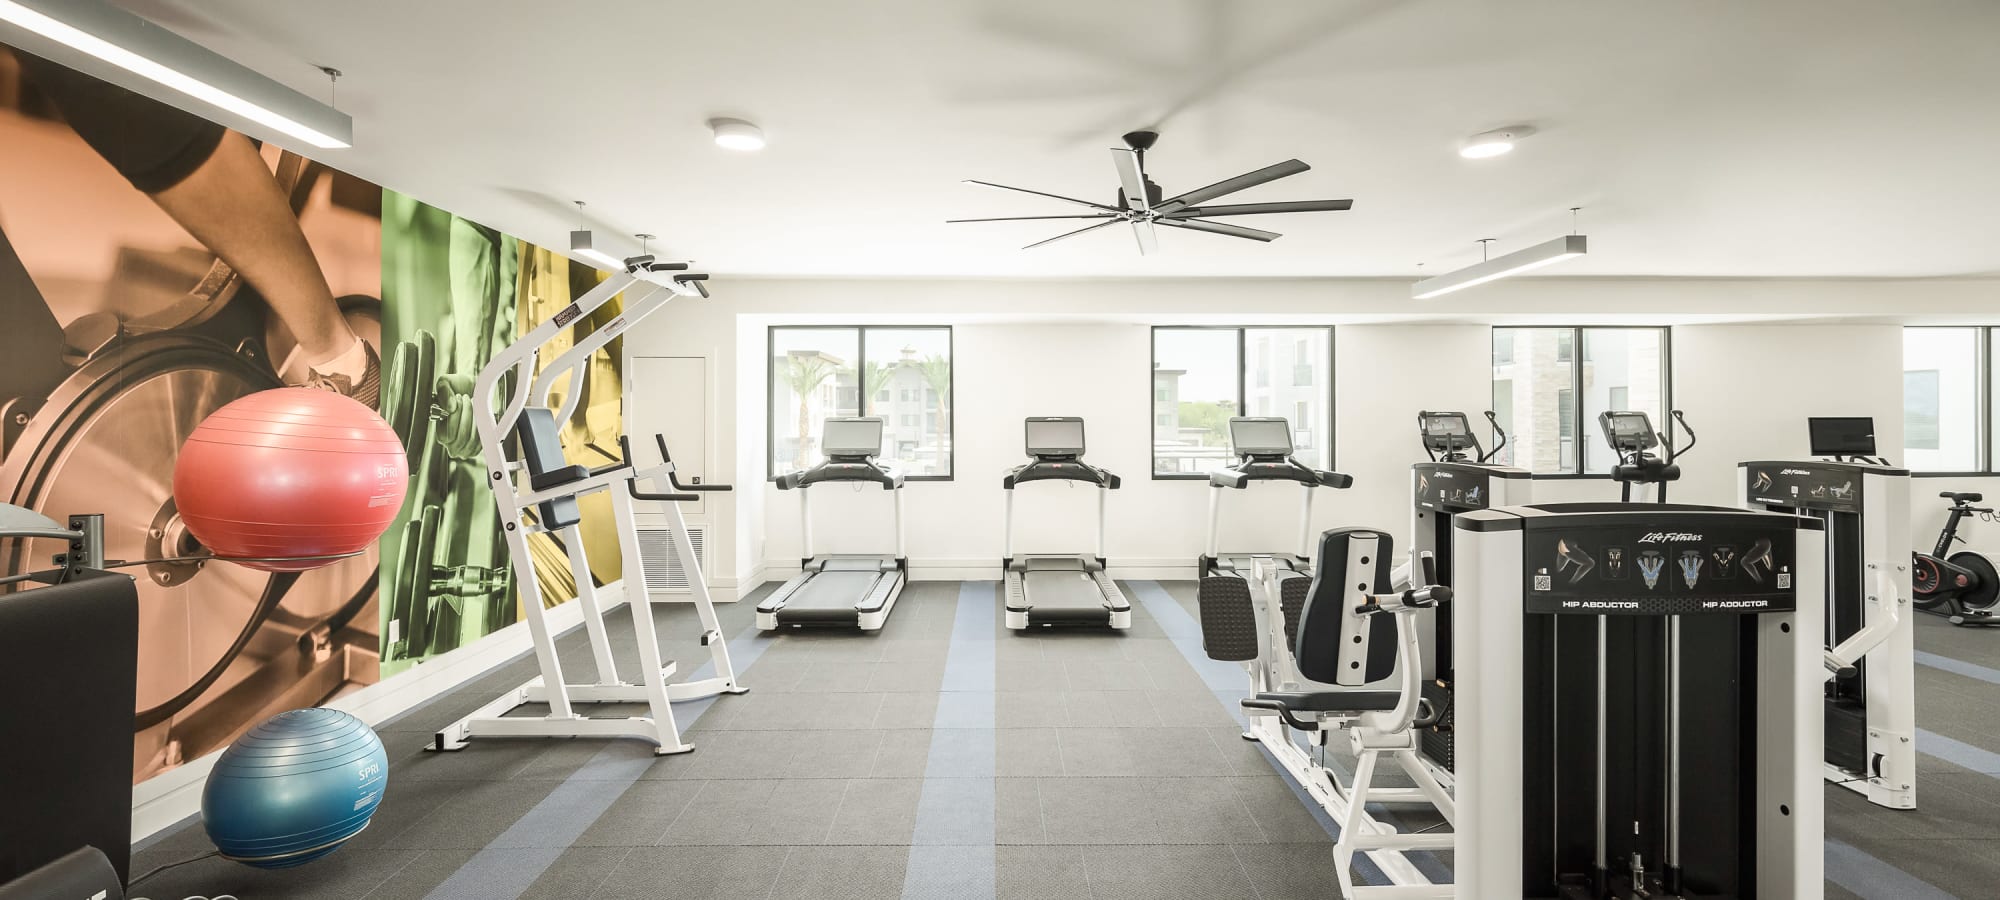 Fully equipped fitness center at Soltra at San Tan Village in Gilbert, Arizona